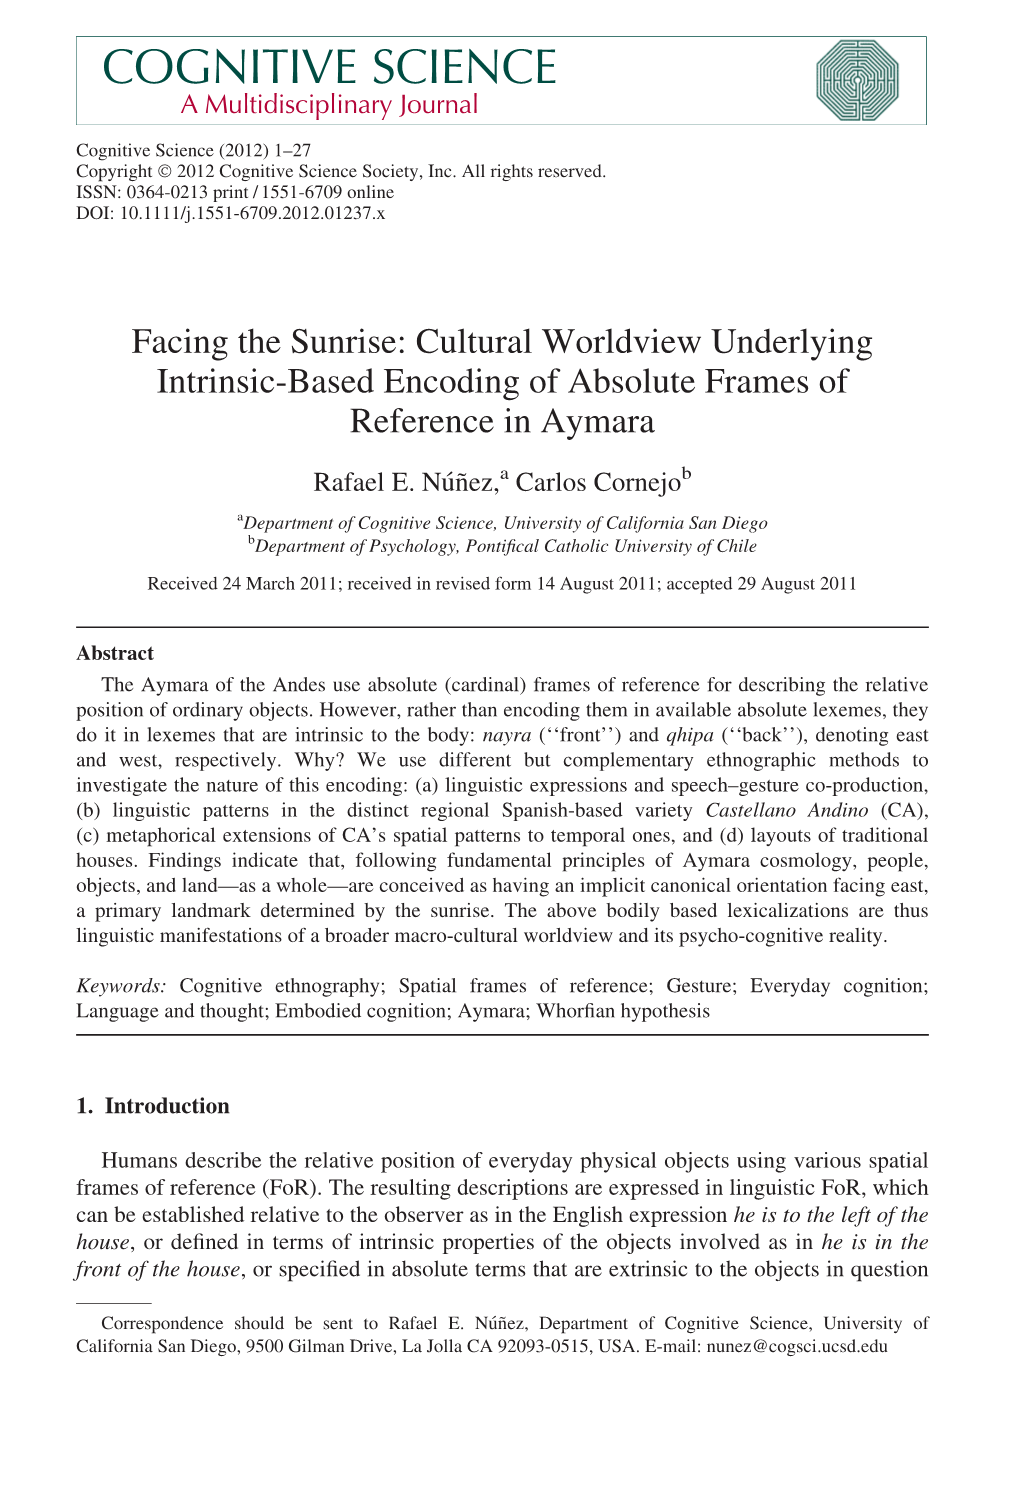 Facing the Sunrise: Cultural Worldview Underlying Intrinsic-Based Encoding of Absolute Frames of Reference in Aymara